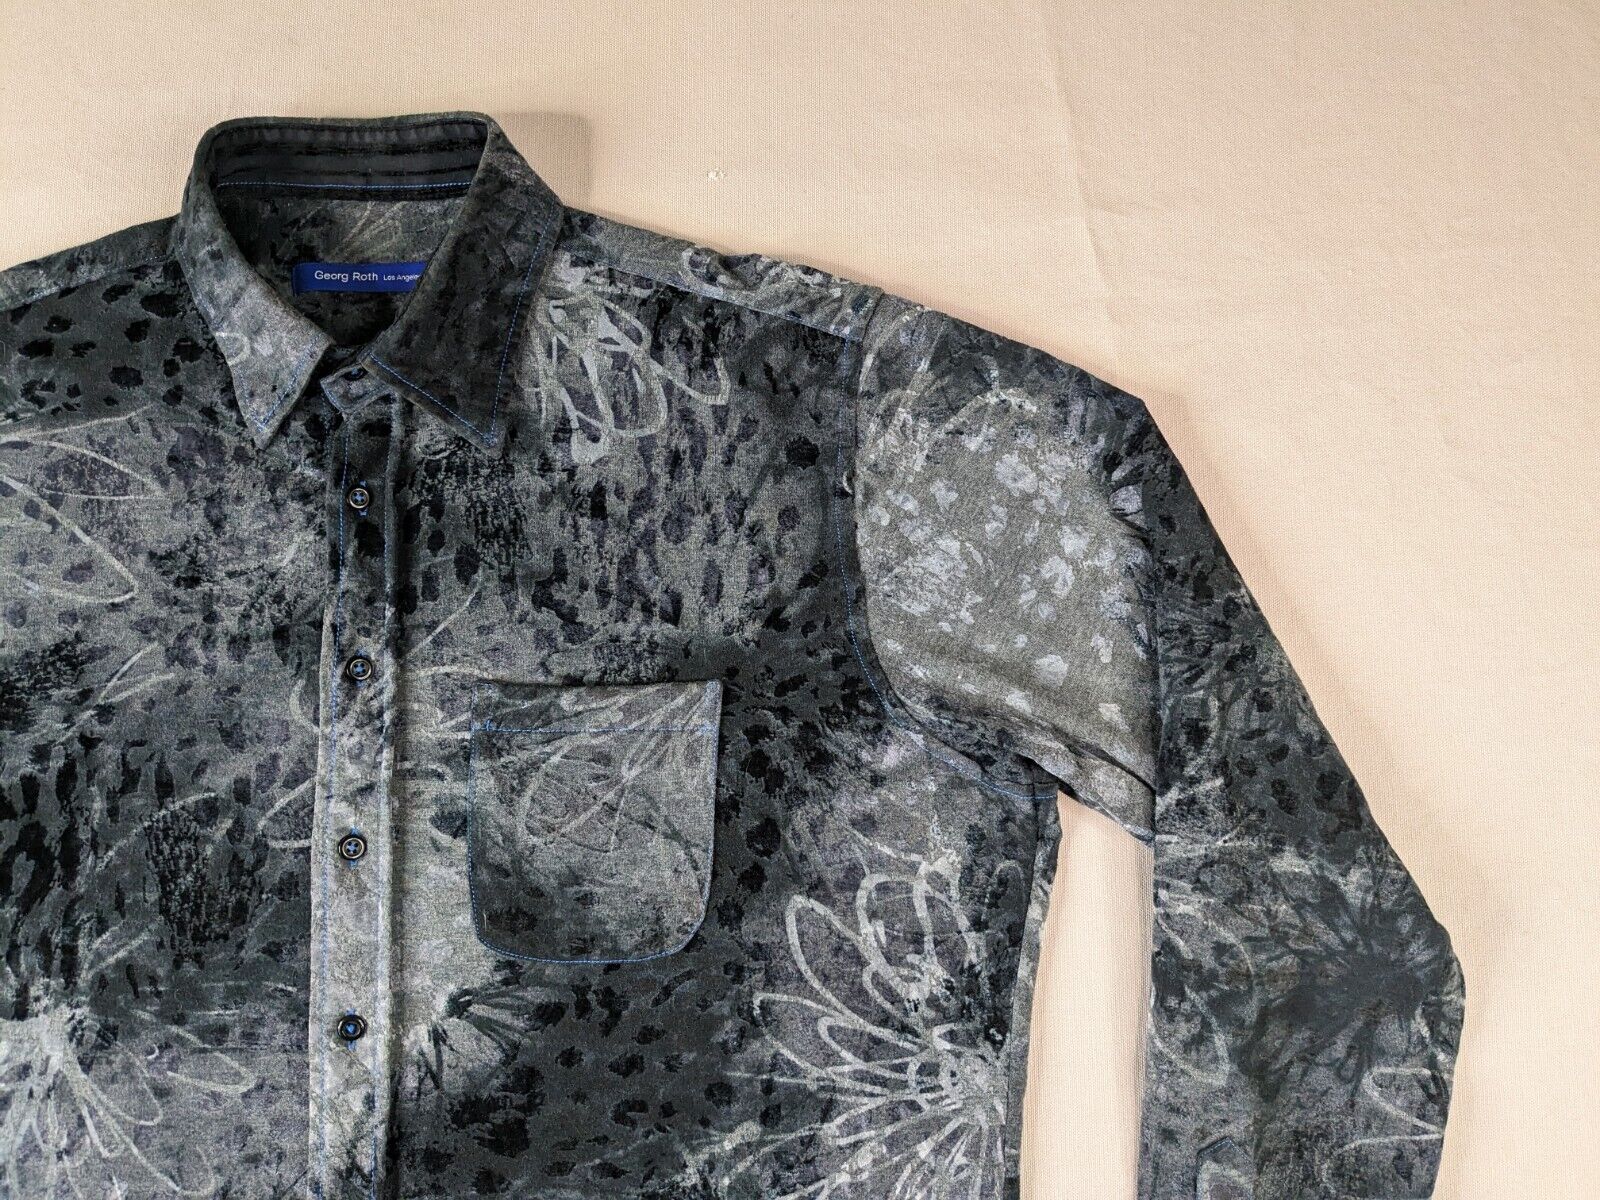 Georg Roth Shirt Adult Floral Pattern Button Up - image 5